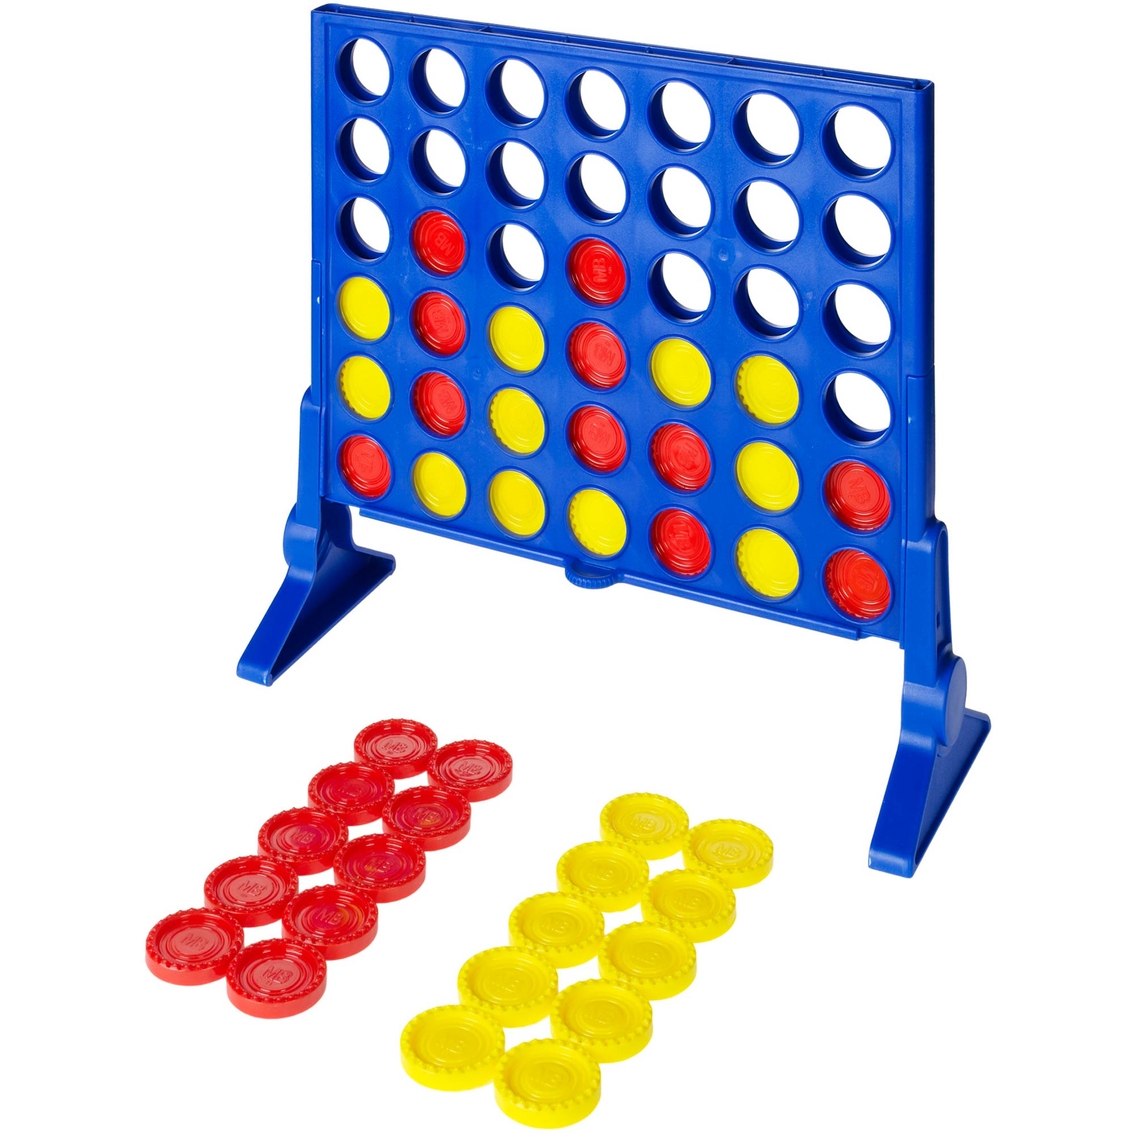 Hasbro Connect 4 Game - Image 2 of 3